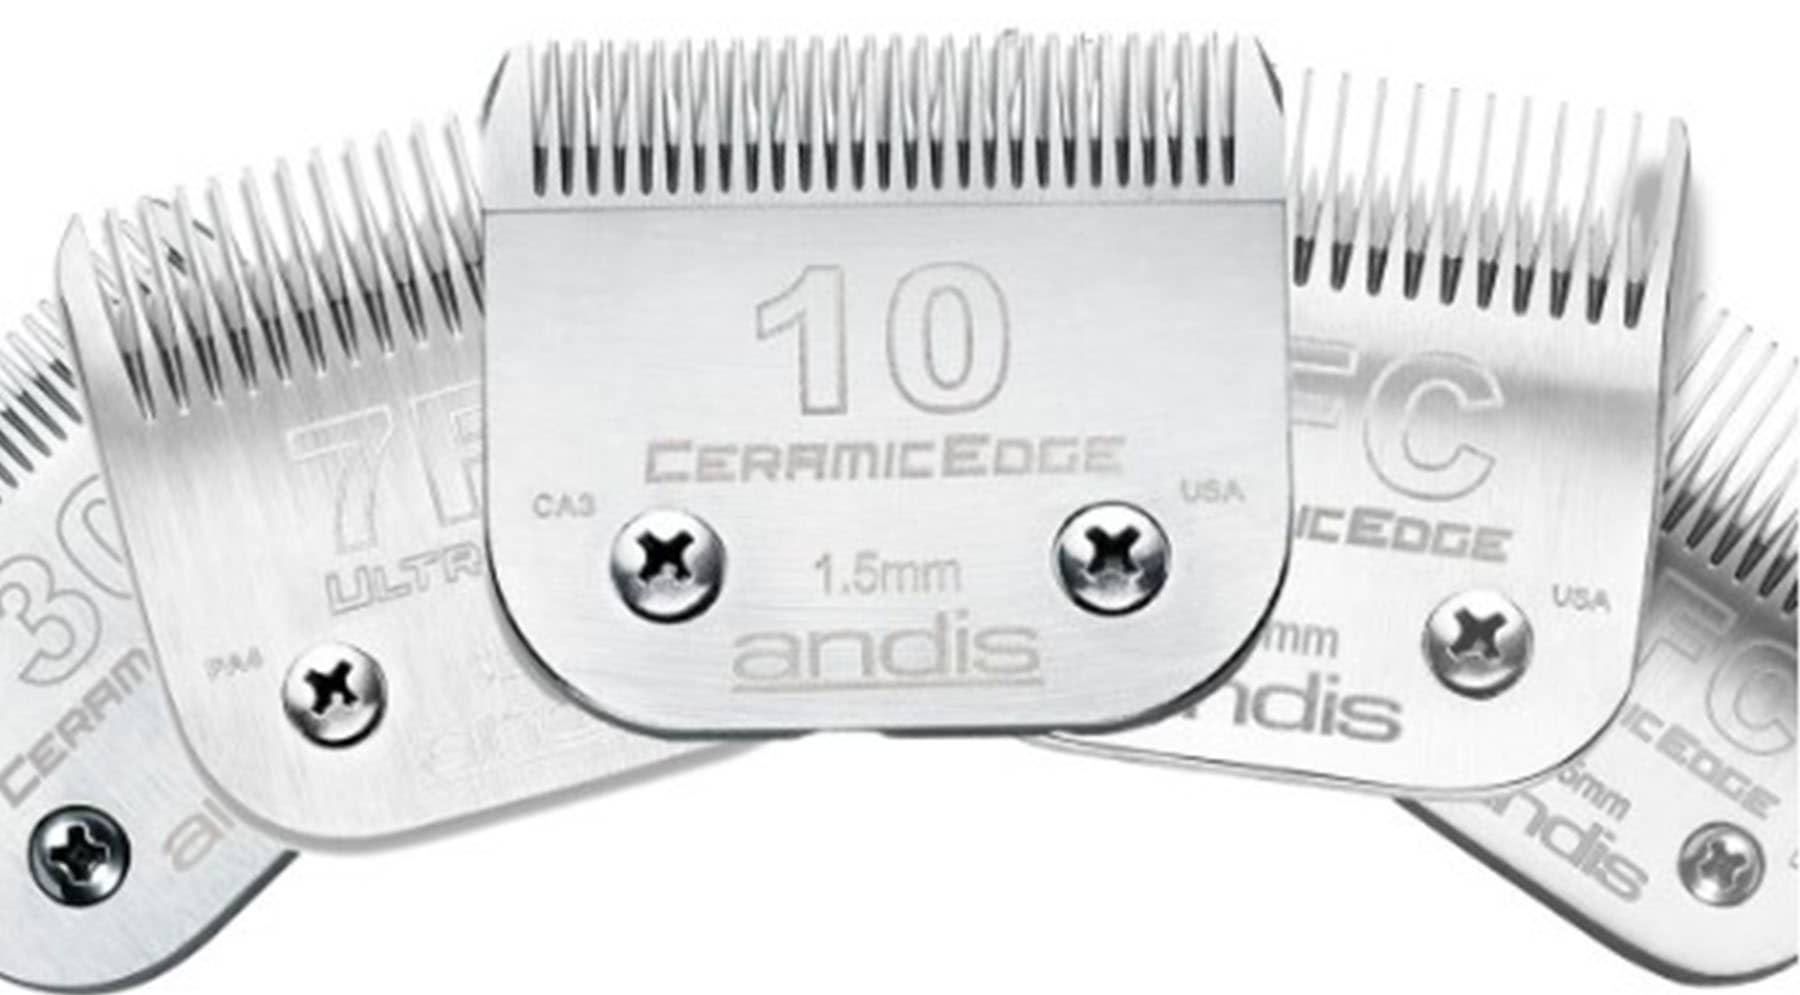 Types of Hair Clipper Blades